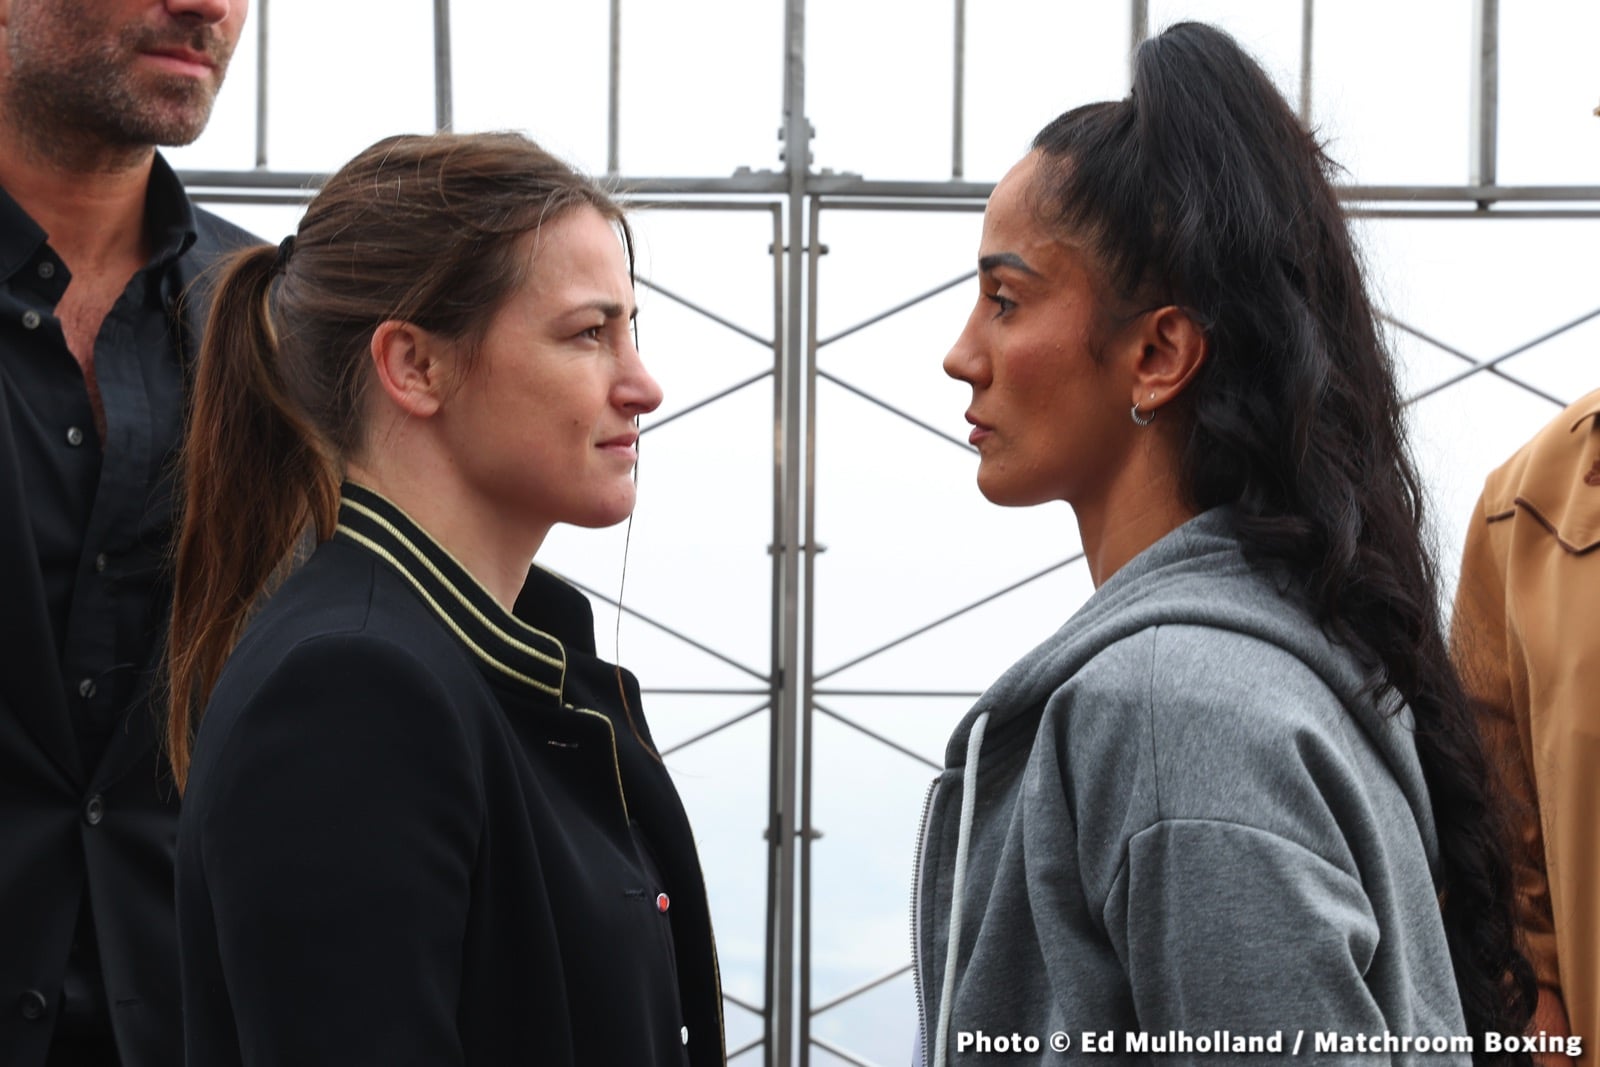 Katie Taylor Vs. Amanda Serrano Is A Fight That Has Lit Up New York And Is "A Moment In Time" - But Who Wins?